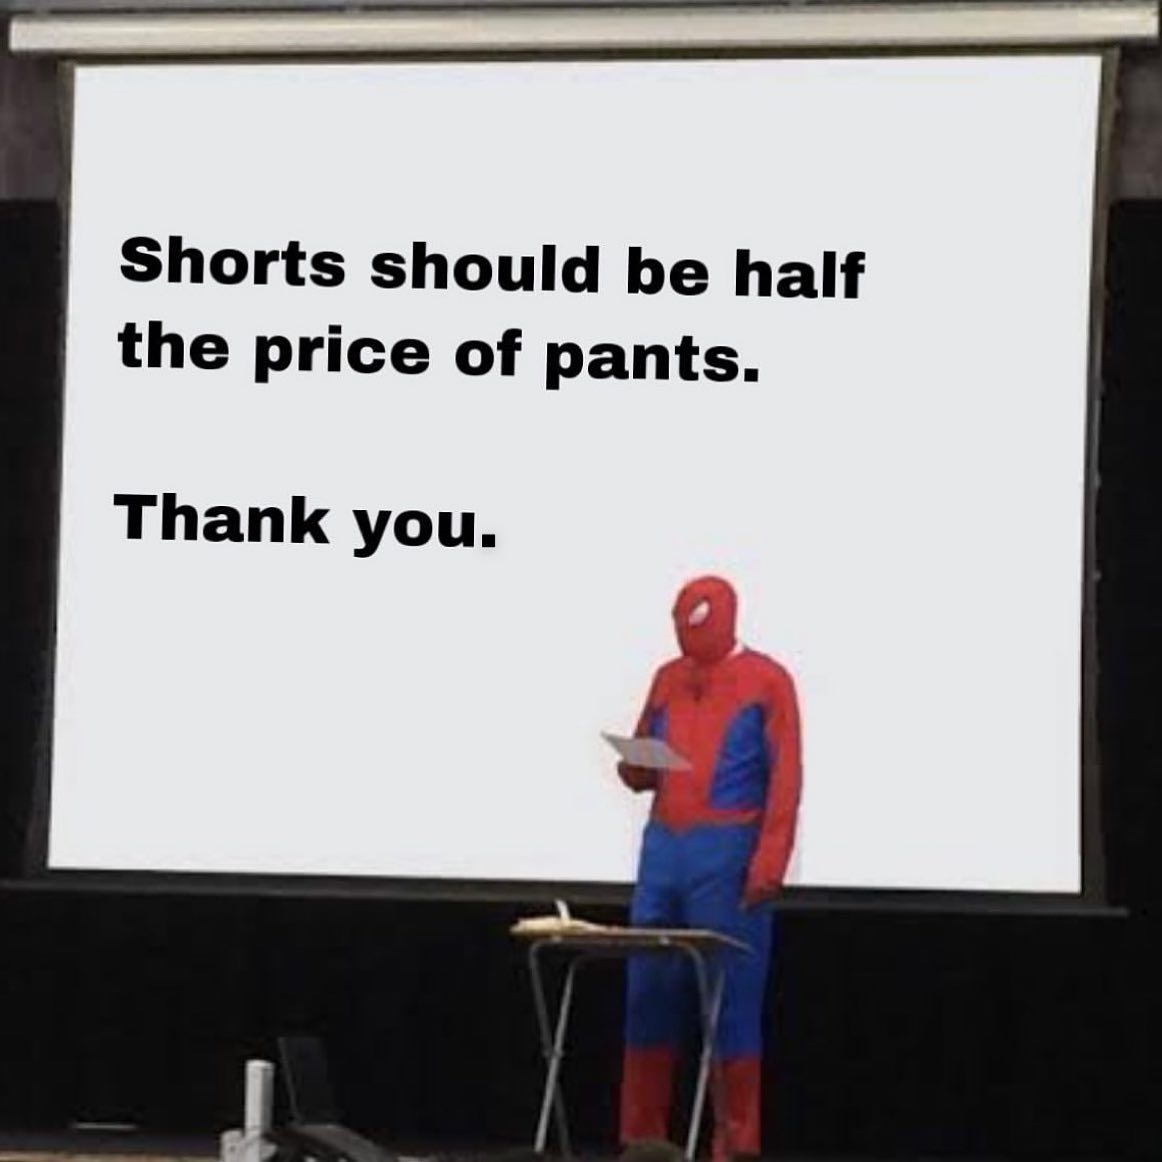 spider man announcement meme - Shorts should be half the price of pants. Thank you.